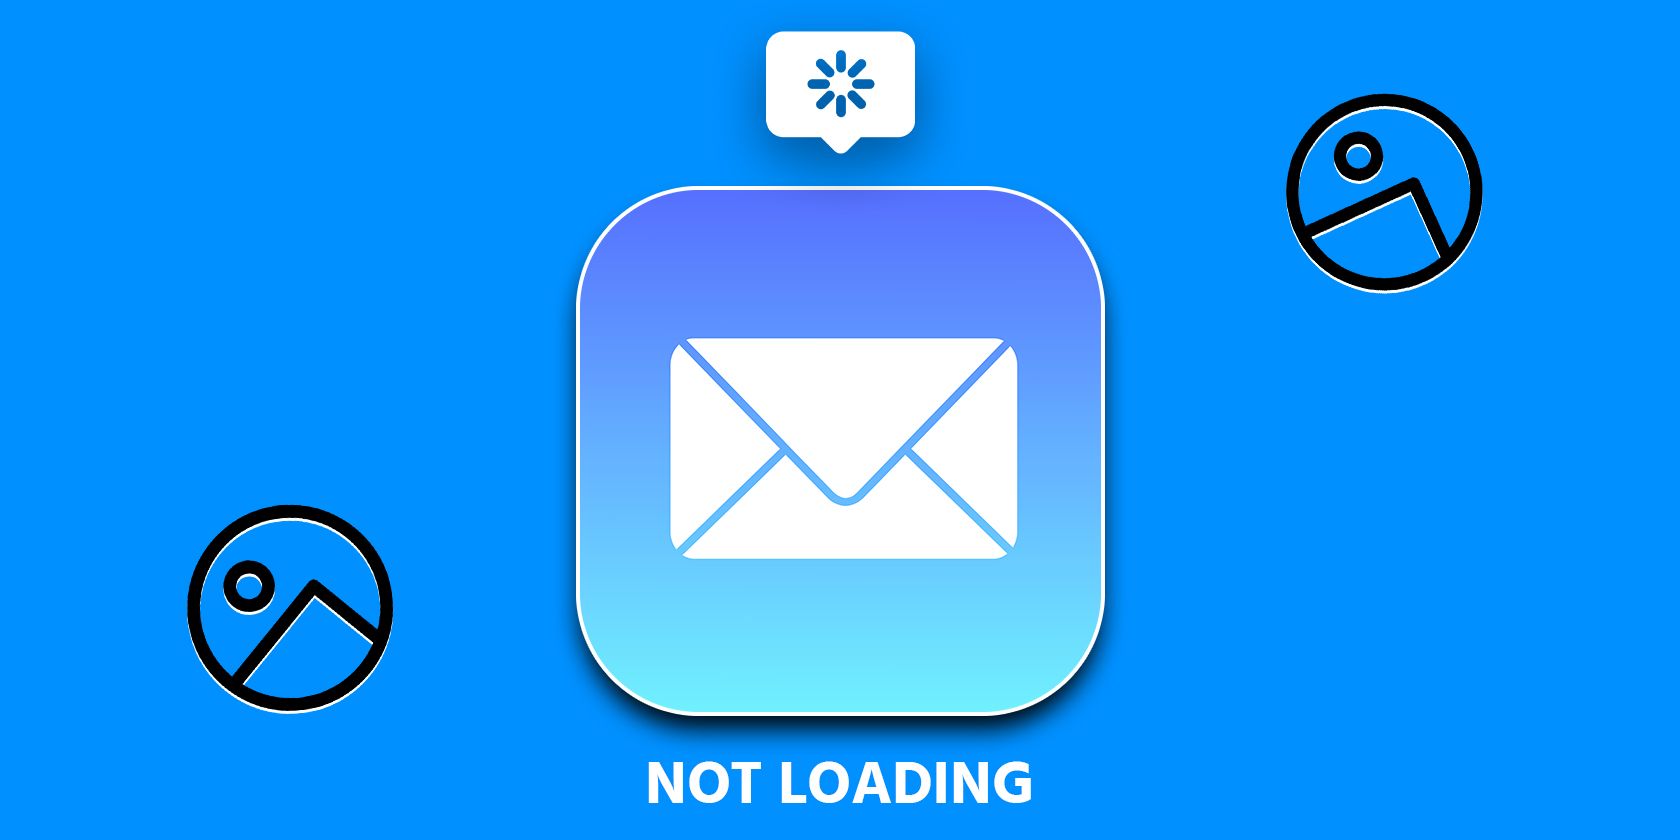 Mail app icon on a blue screen with a text saying not loading